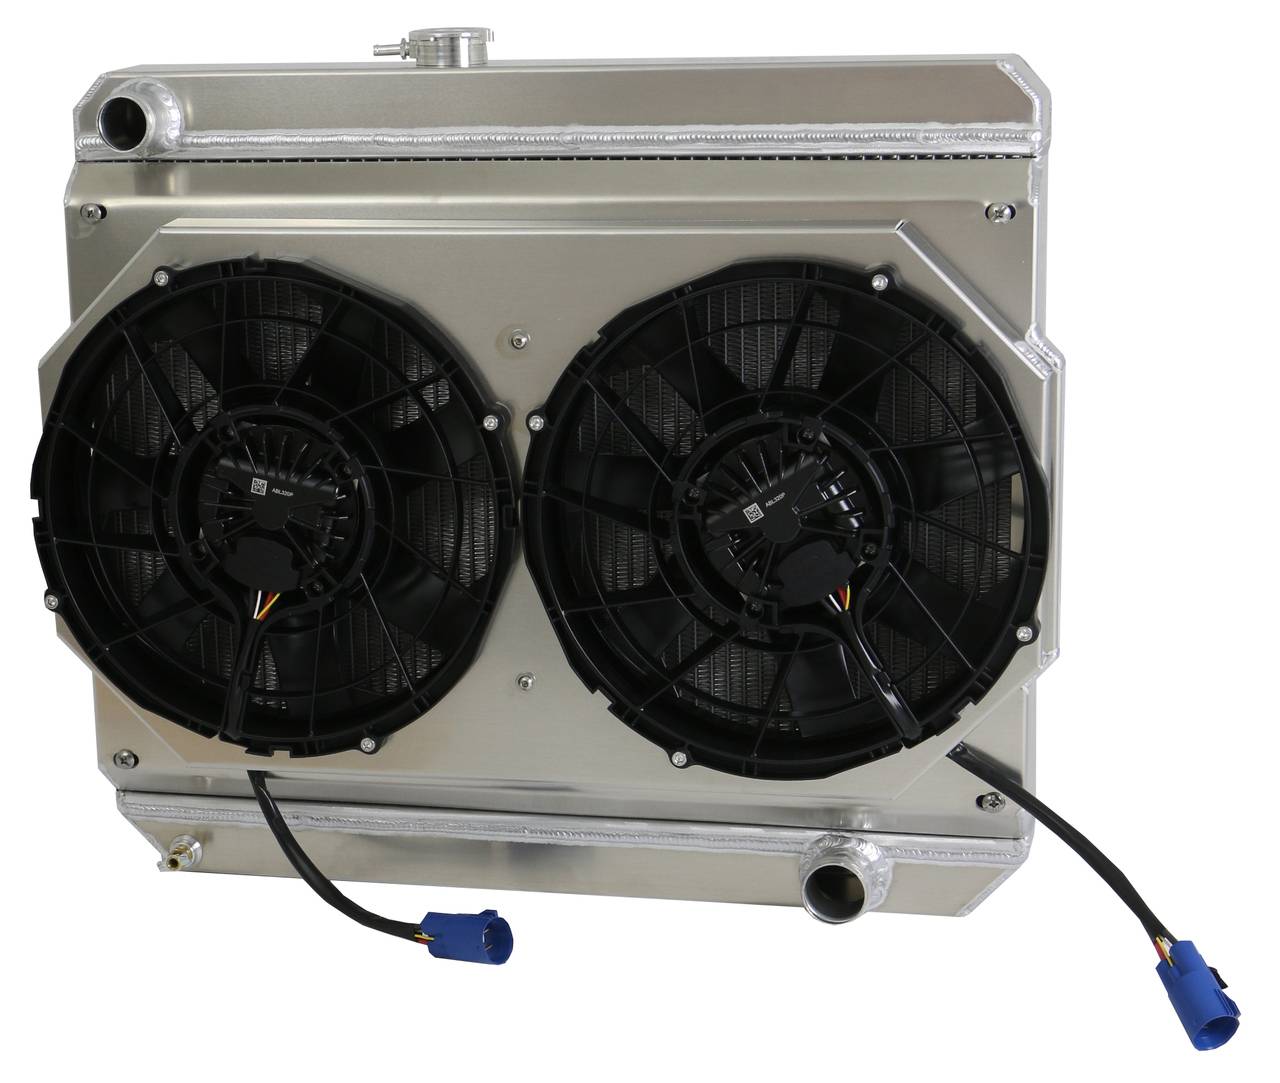 Wizard Cooling Inc - Wizard Cooling - 1966-1967 Chevrolet Bel Air/ Impala (17.5" Core, w/ Factory Air) Aluminum Radiator w/ BRUSHLESS FANS & Shroud - 27300-102BL